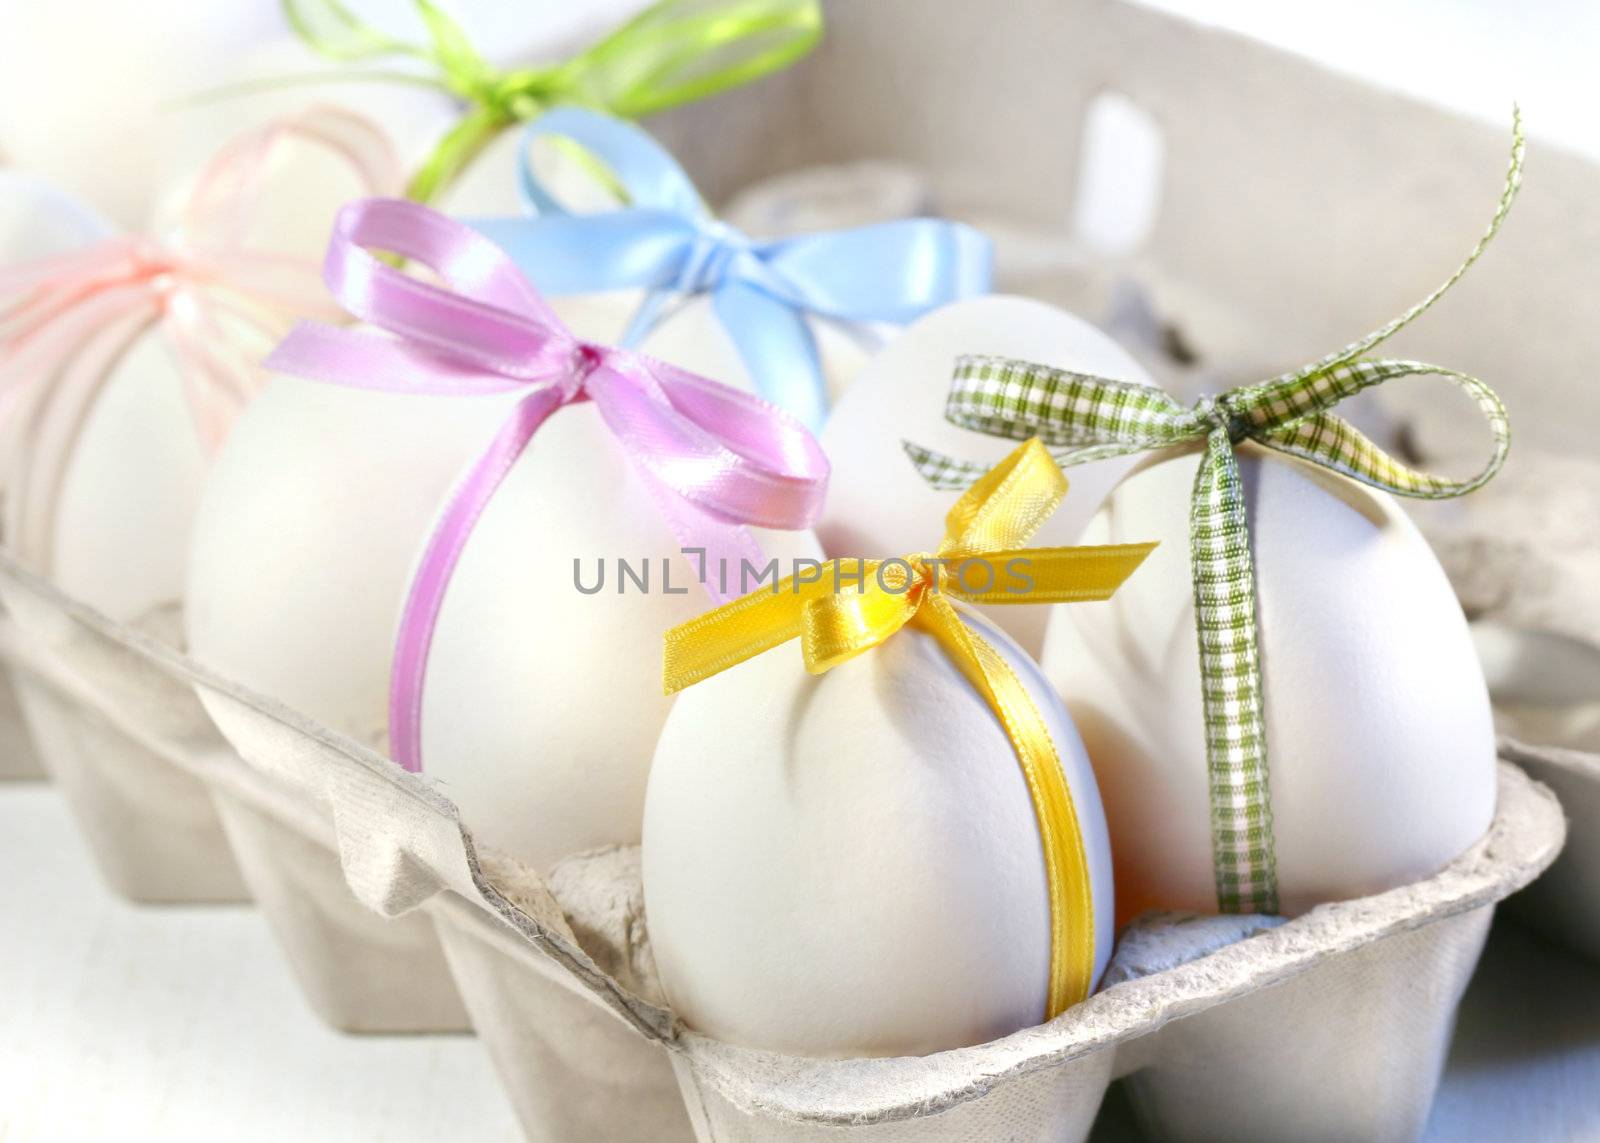 White eggs with colored ribbons in cardboard crate 